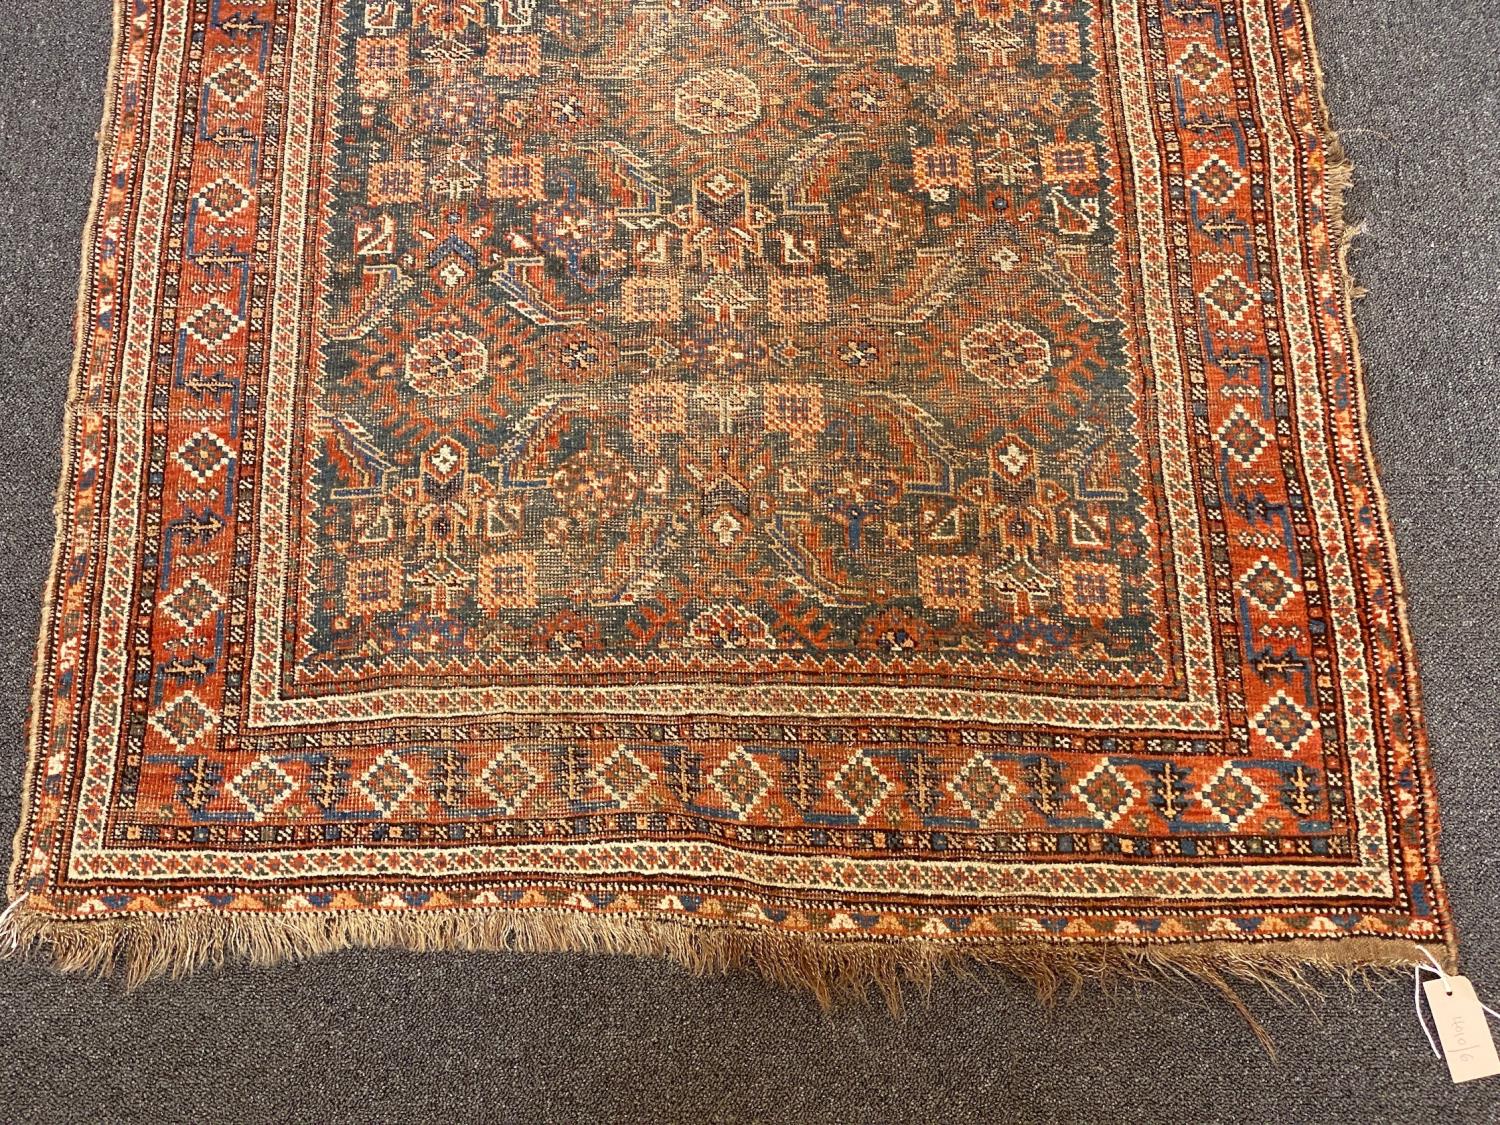 A Shiraz blue ground rug with dense floral field (worn), 144 x 102 cms - Image 2 of 4